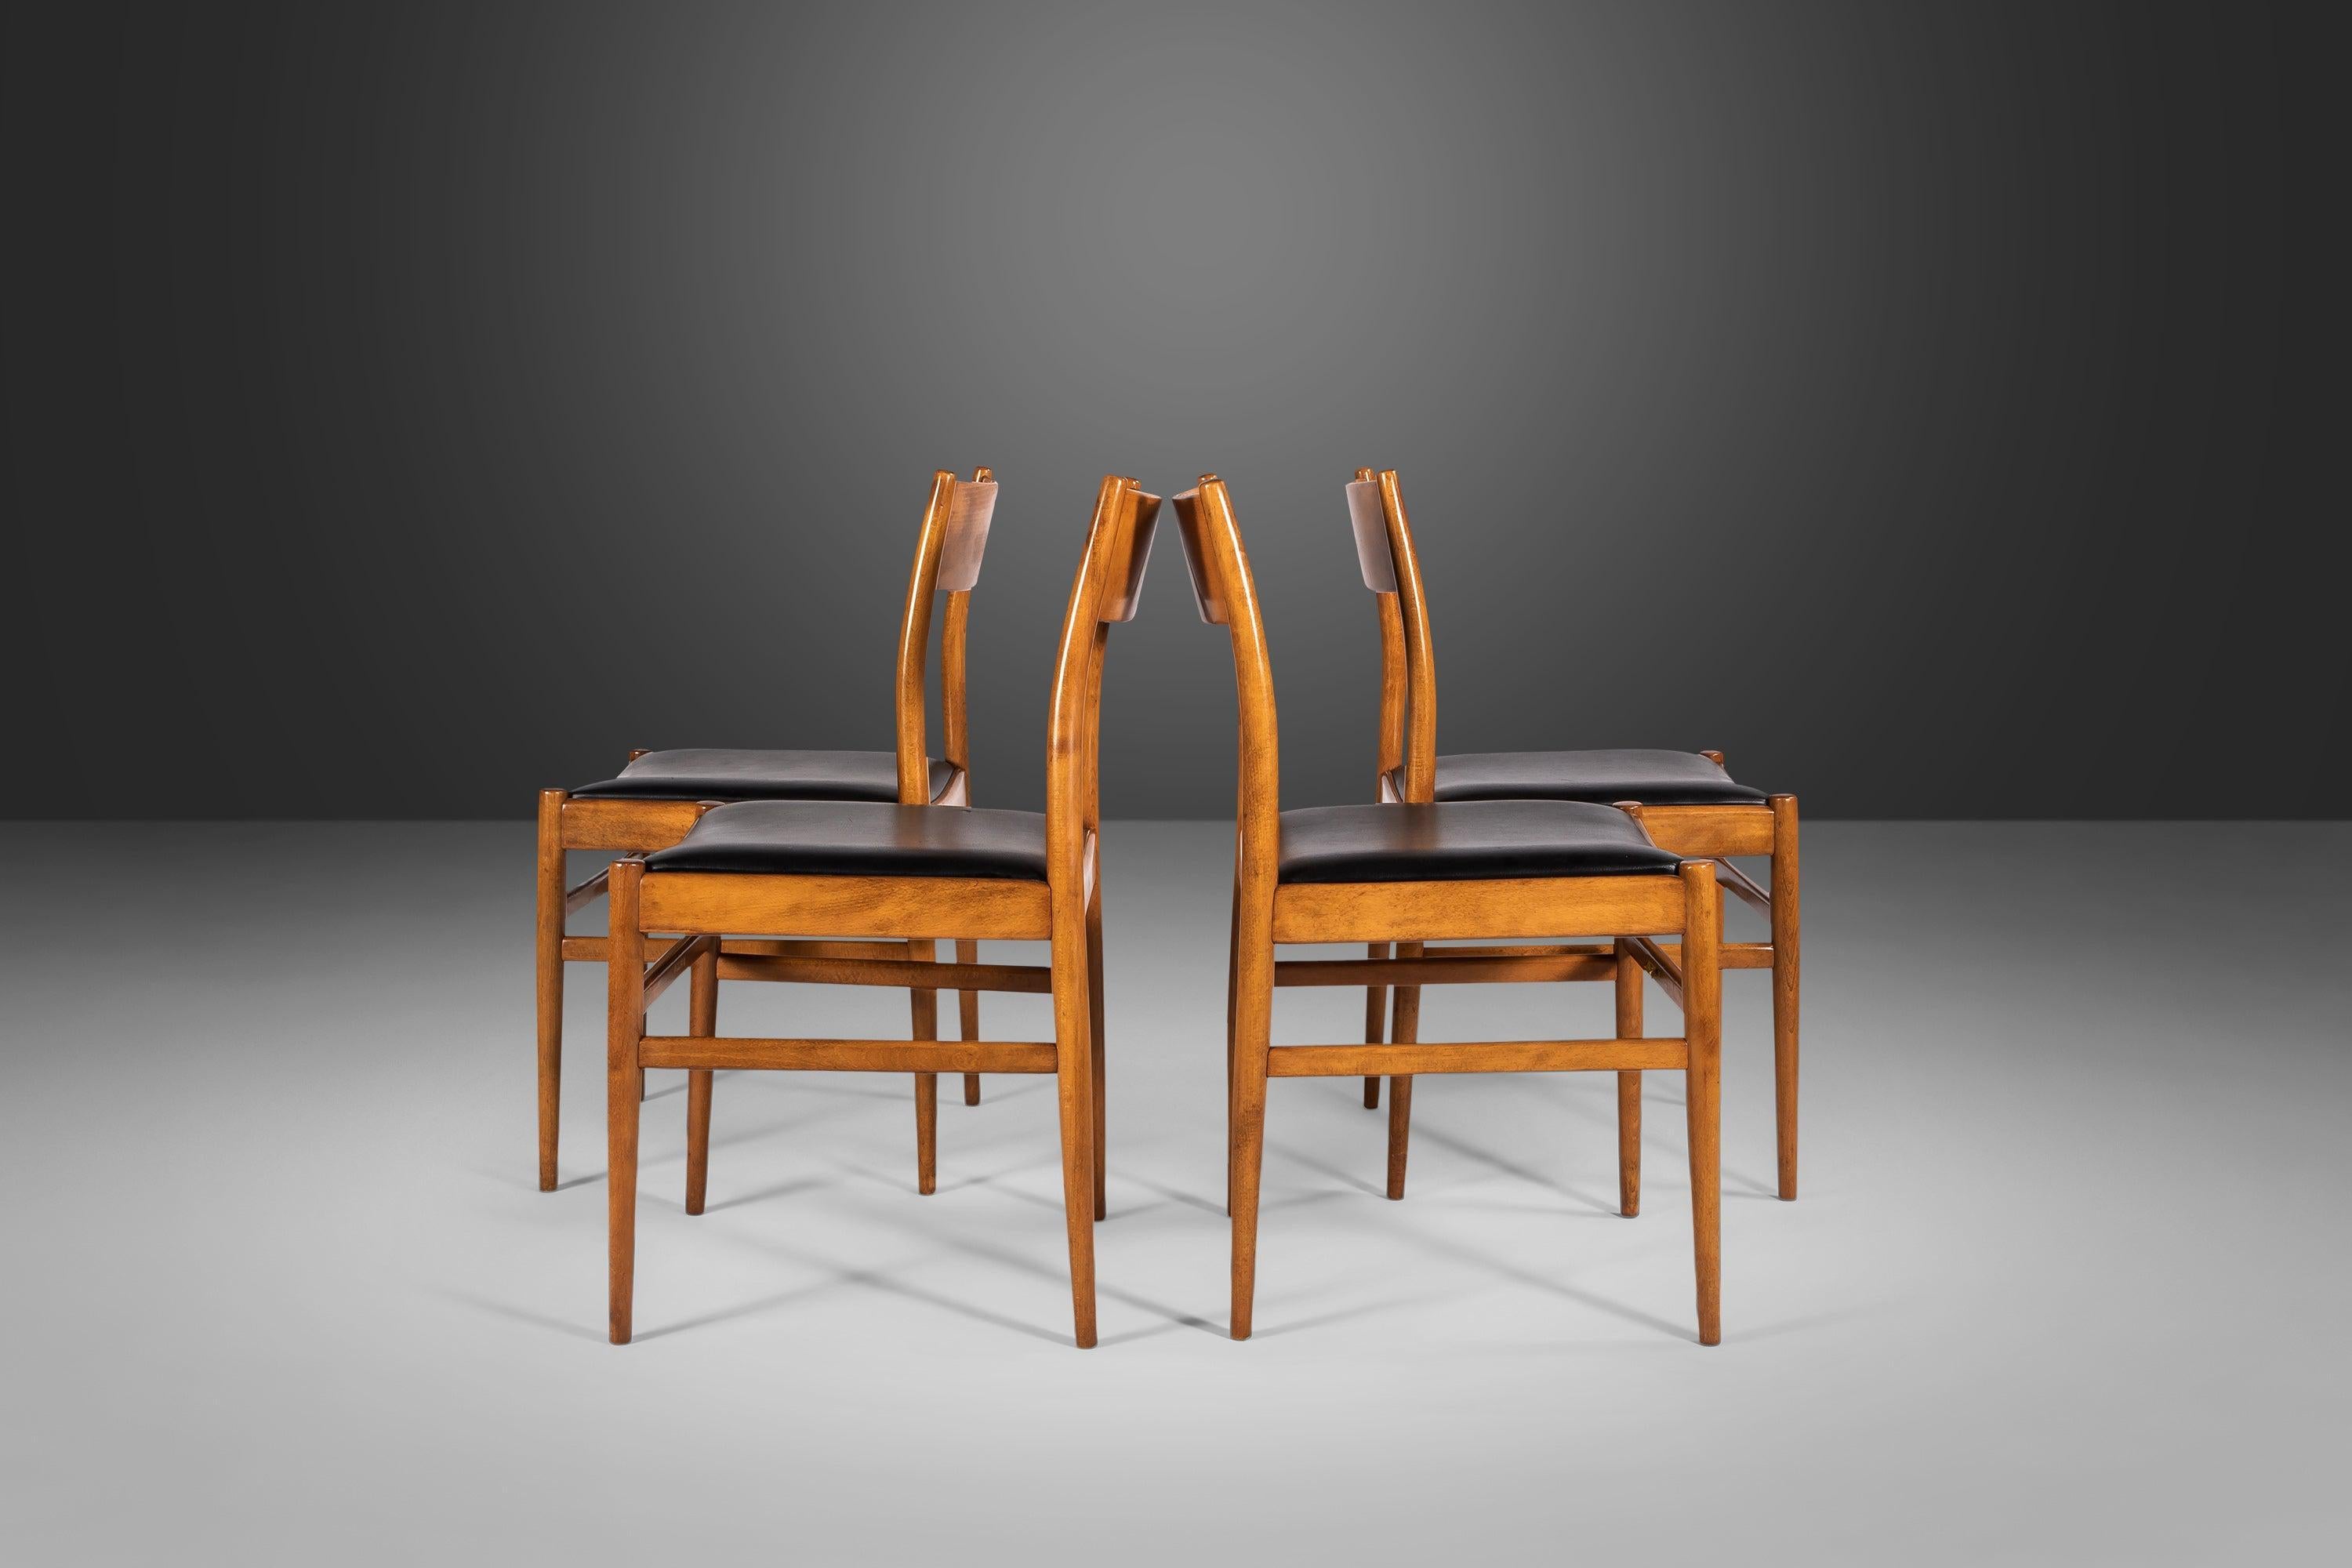 Set of Four '4' Mid Century Danish Modern Contoured Oak Dining Chairs, c. 1960's For Sale 5